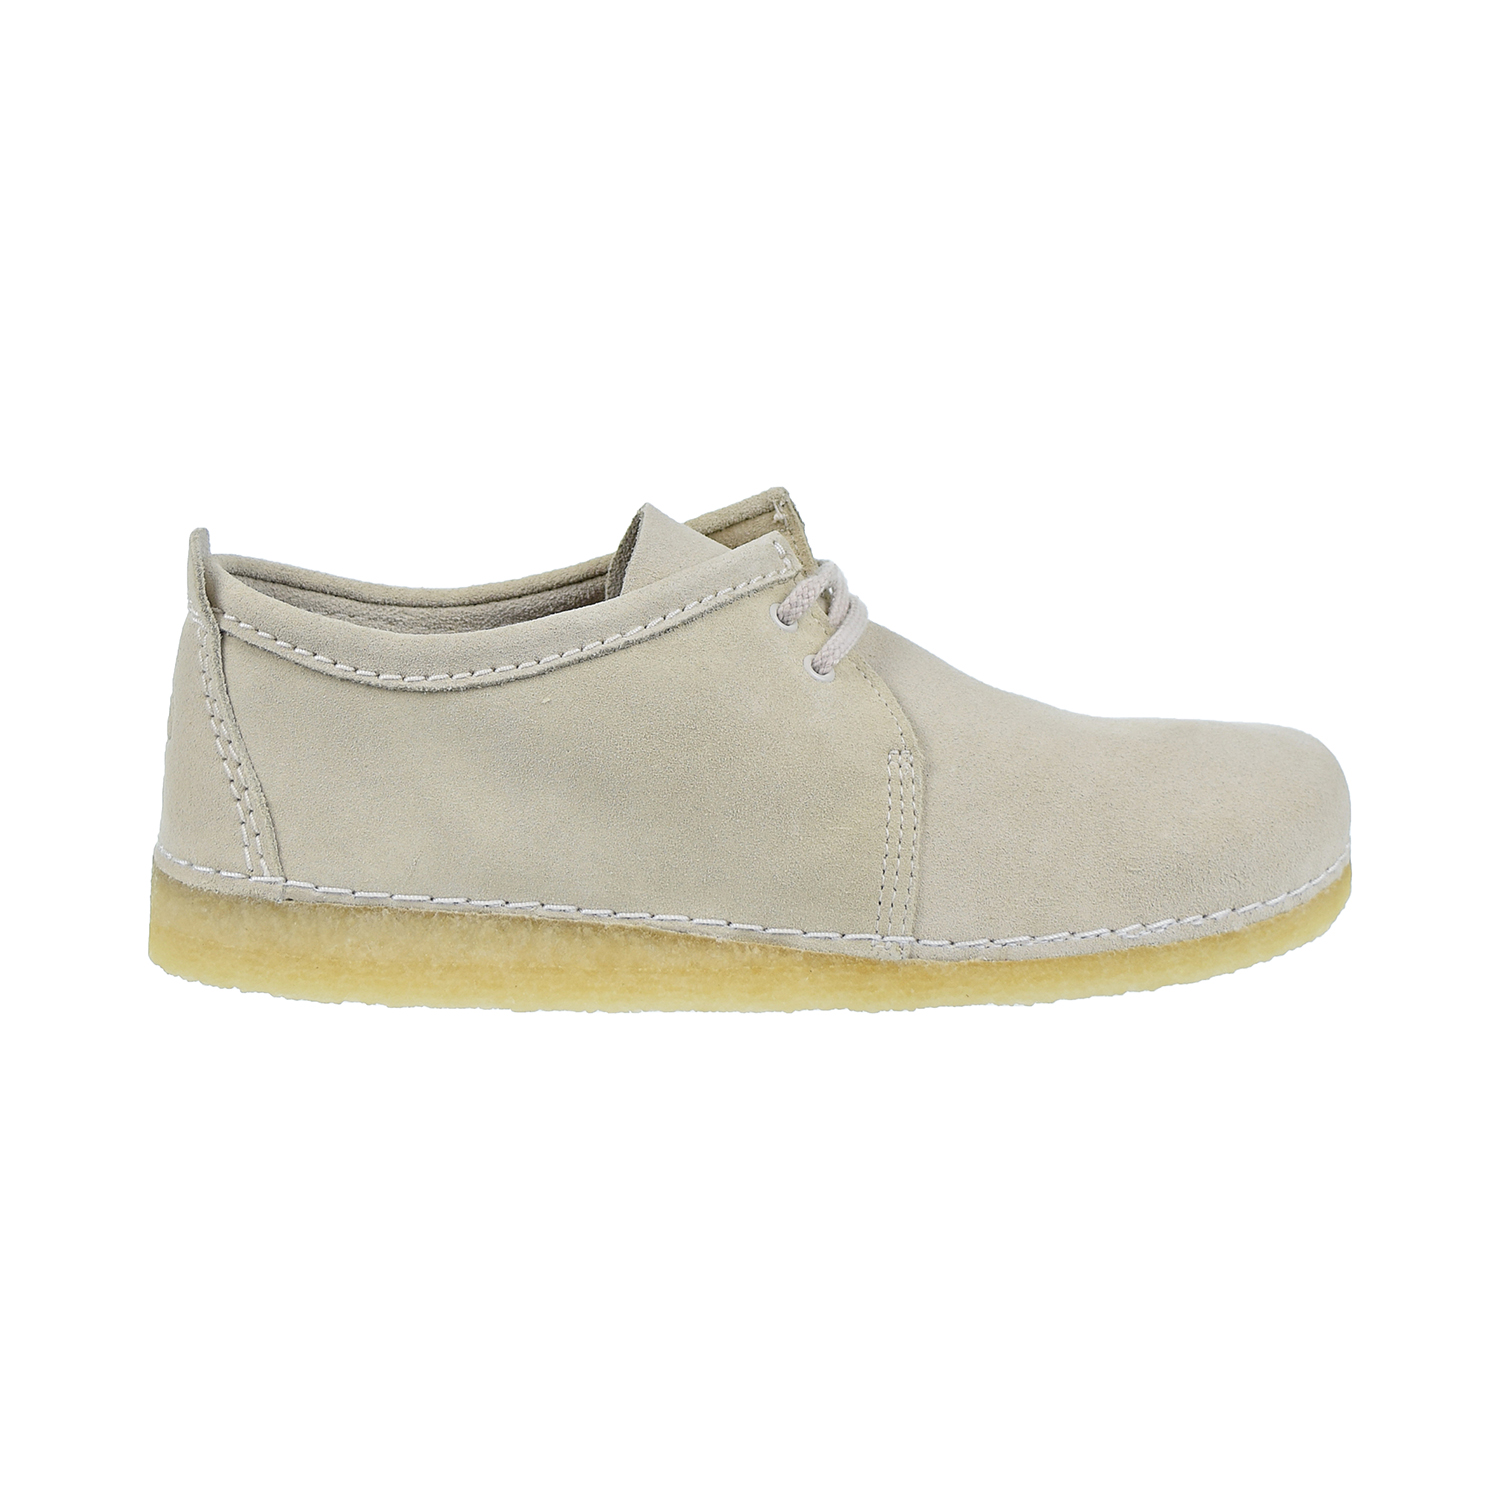 mens white clarks shoes